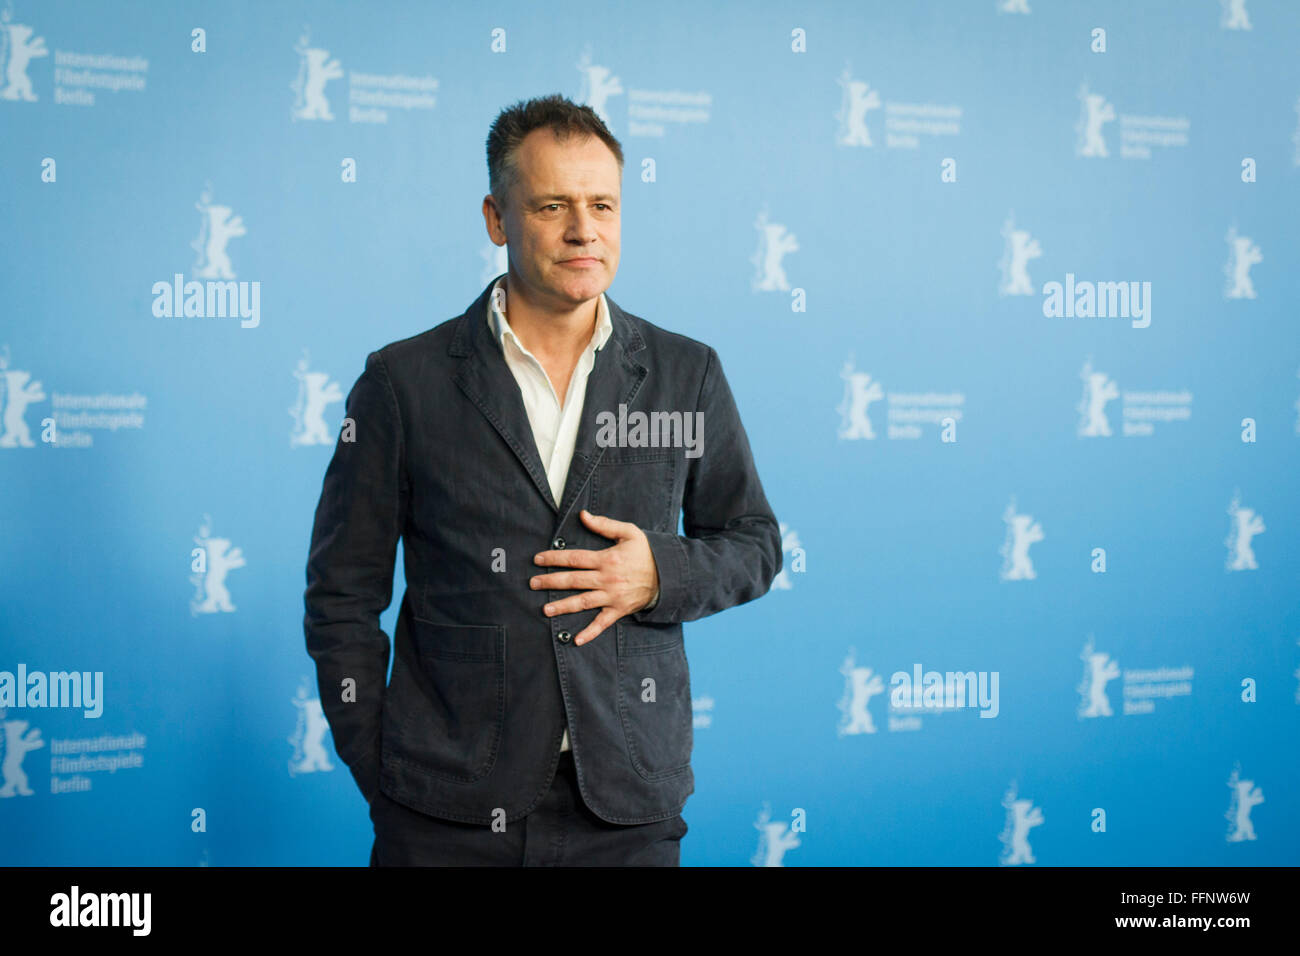 Berlin, Germany. 16th February, 2016. Director Michael Grandage attends the 'Genius' photo call during the 66th Berlinale International Film Festival Berlin Credit:  Odeta Catana/Alamy Live News Stock Photo